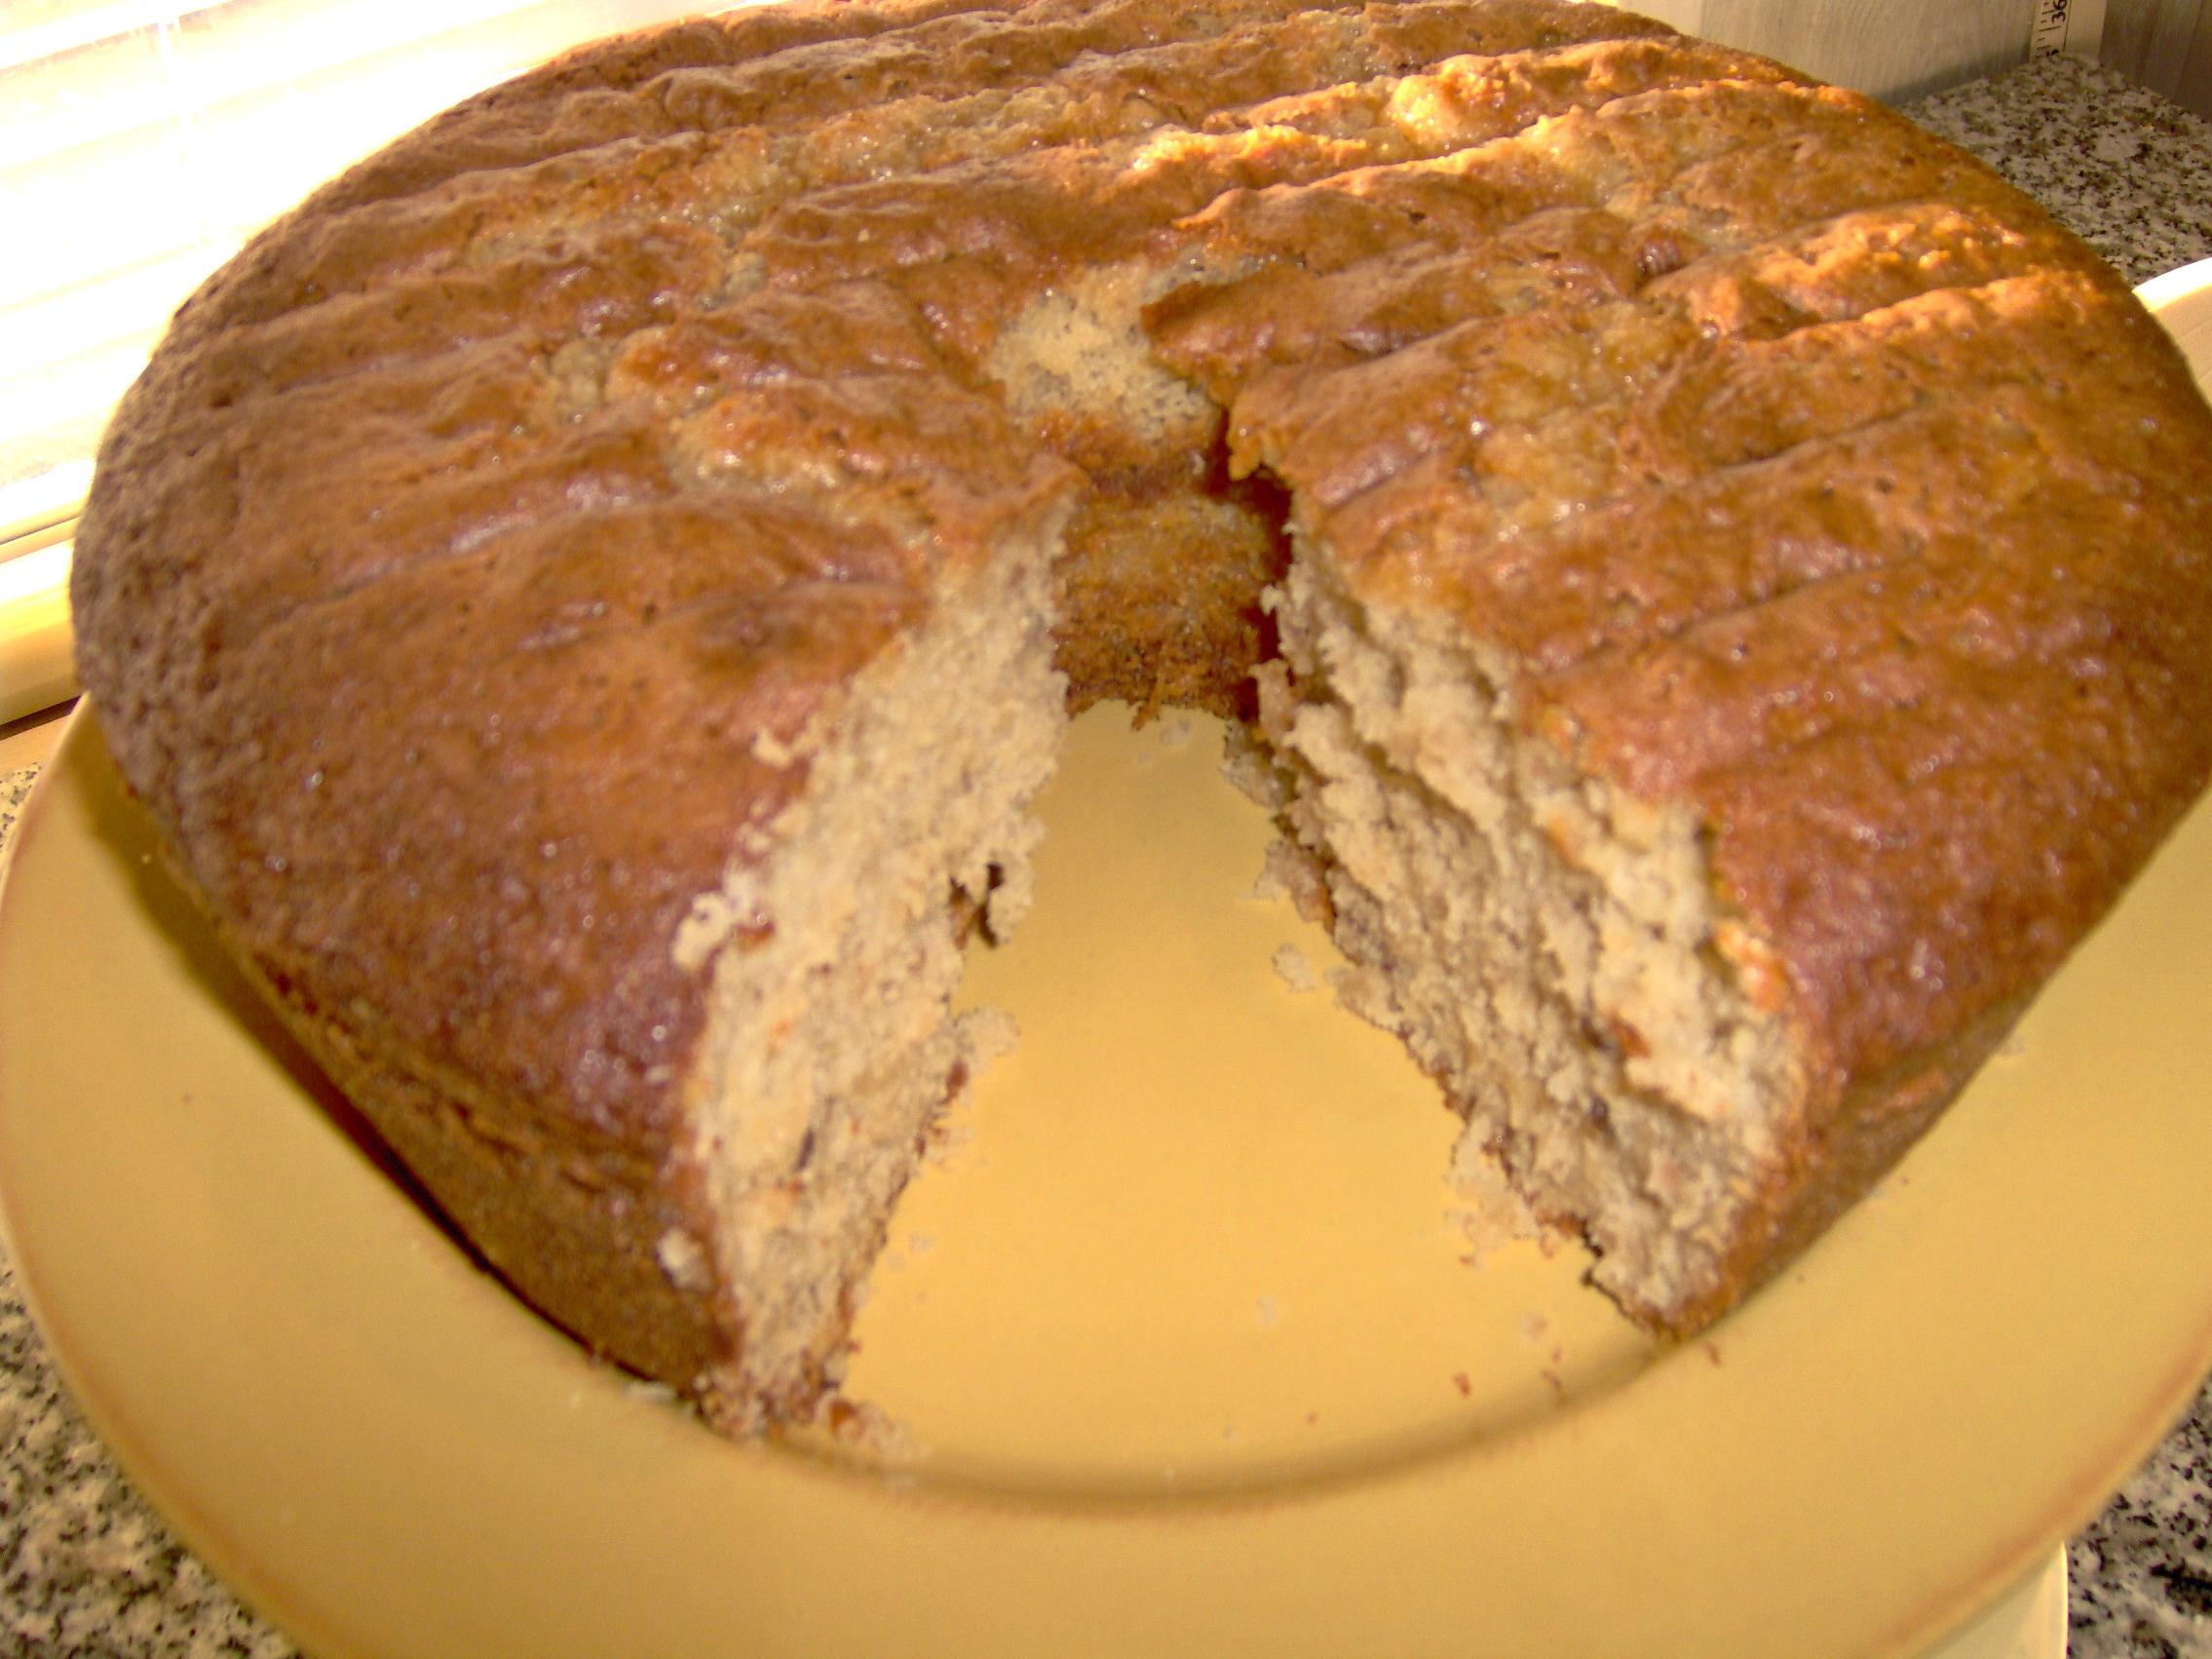  Indulge in a slice of this irresistible Butter Pecan Pound Cake!